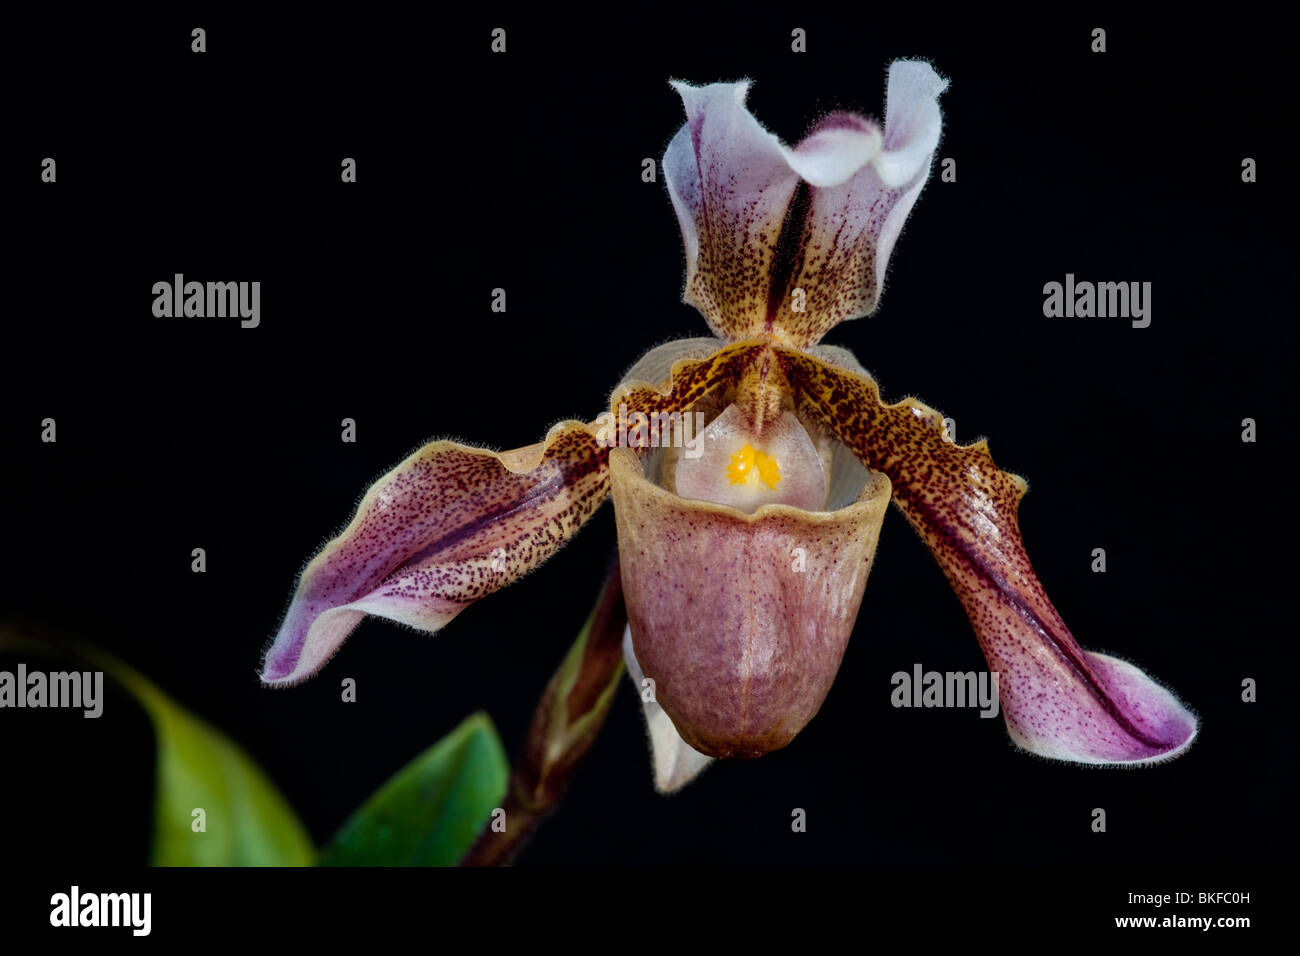 Close-up of a Paphiopedilum orchid flower in bloom Stock Photo